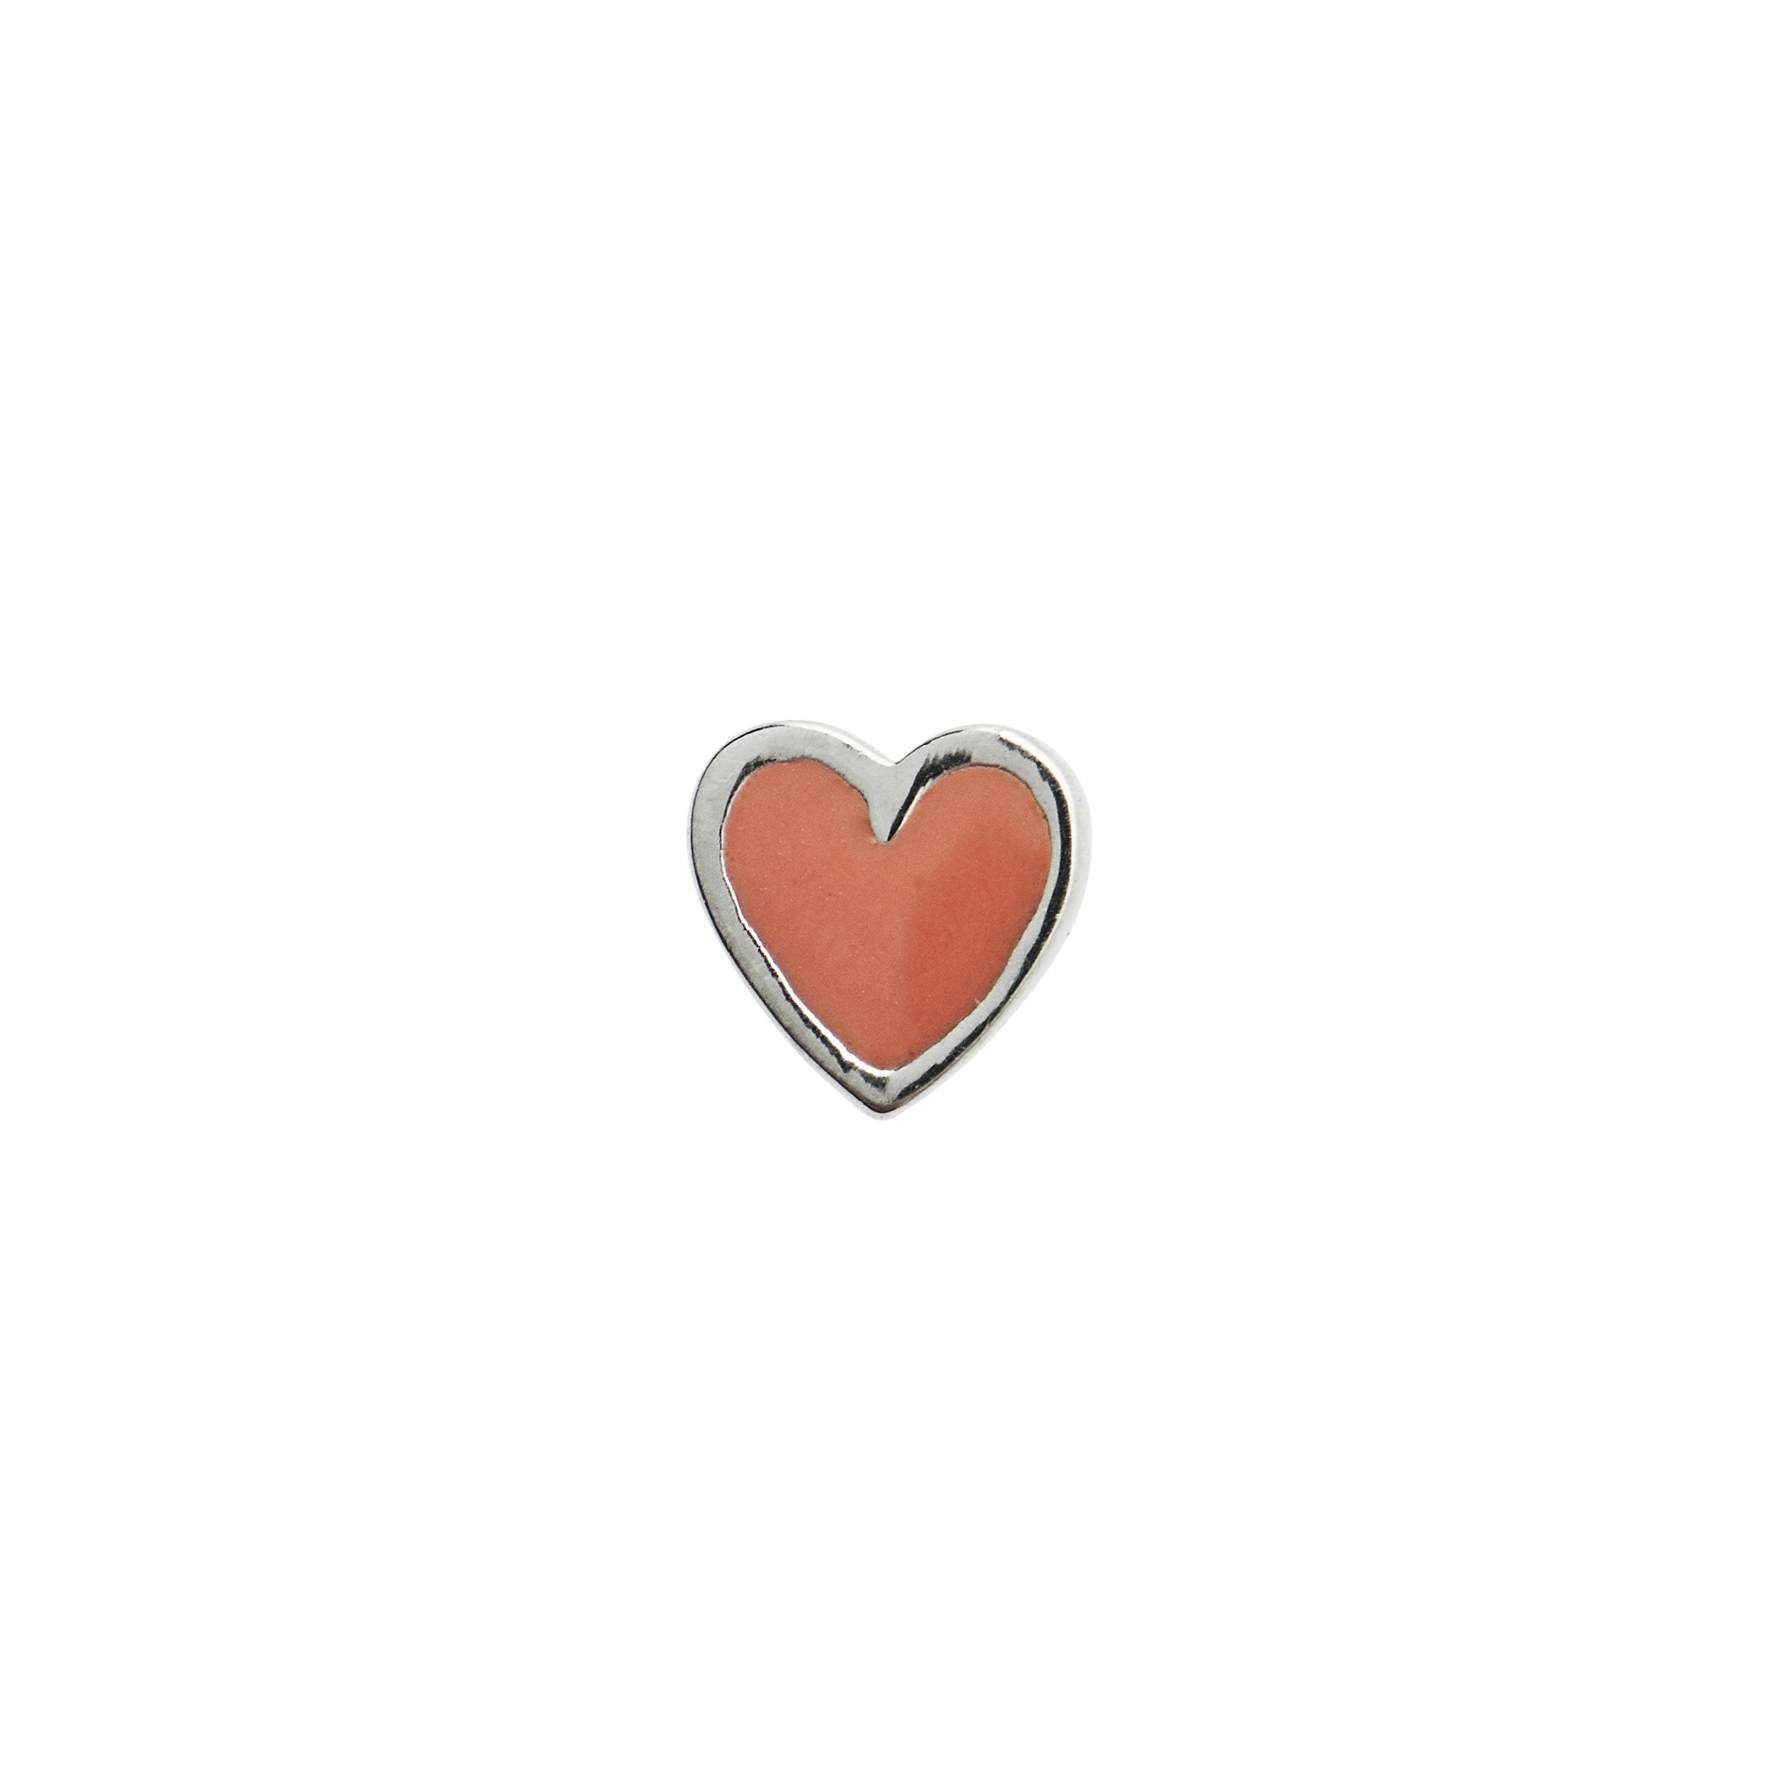 Petit Love Heart Coral von STINE A Jewelry in Silber Sterling 925